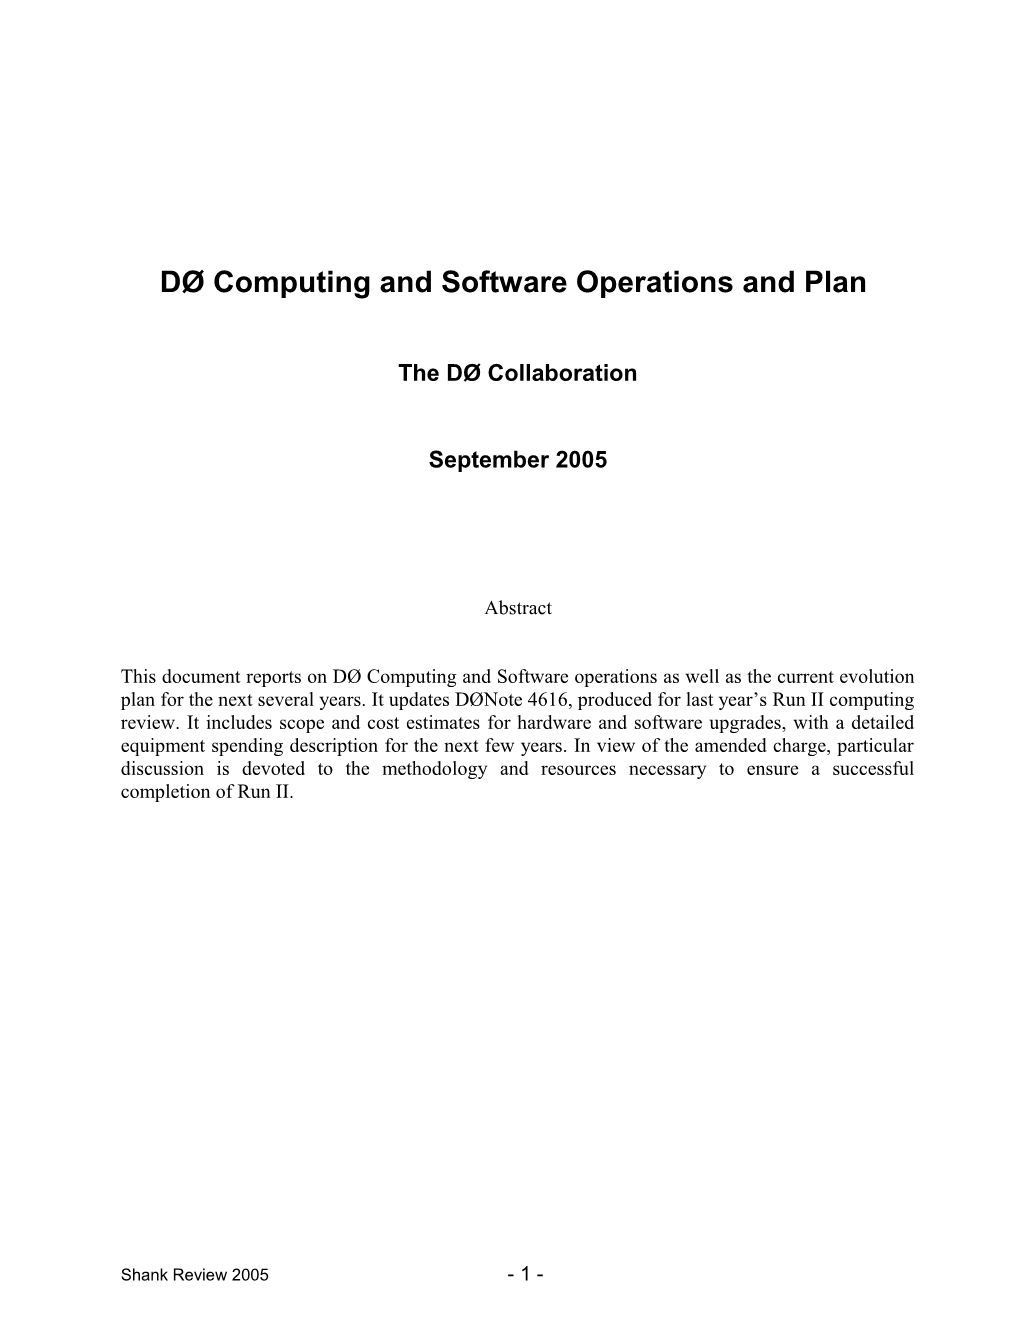 DØ Computing and Software Operations and Plan